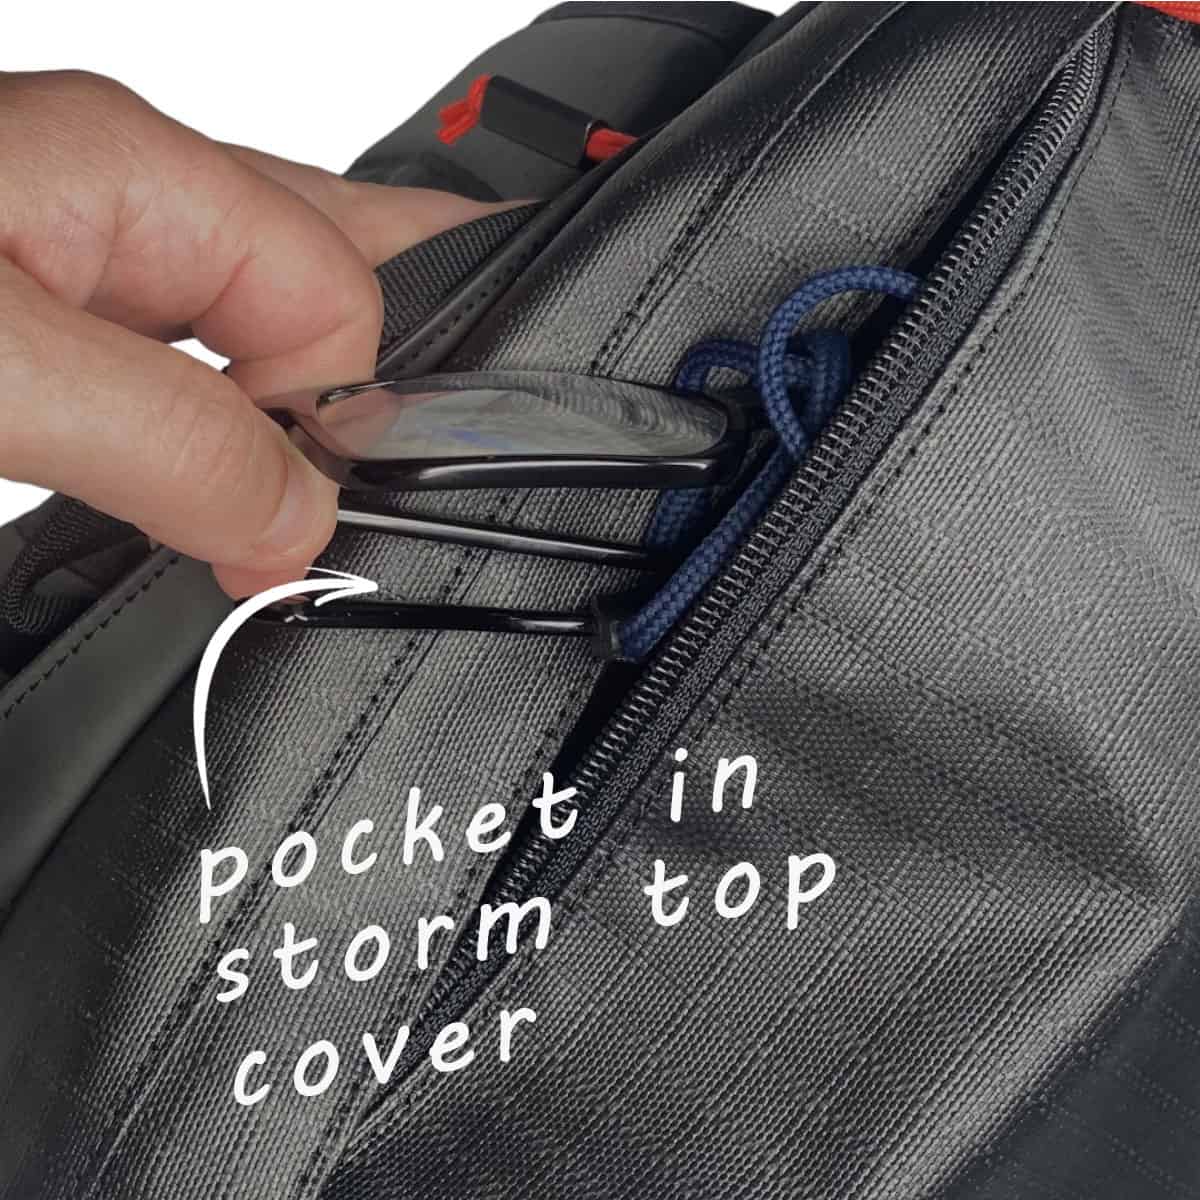 The Dainese D-Throttle Riding Backpack is a reliable and versatile choice designed for everyday use - storm cover pocket